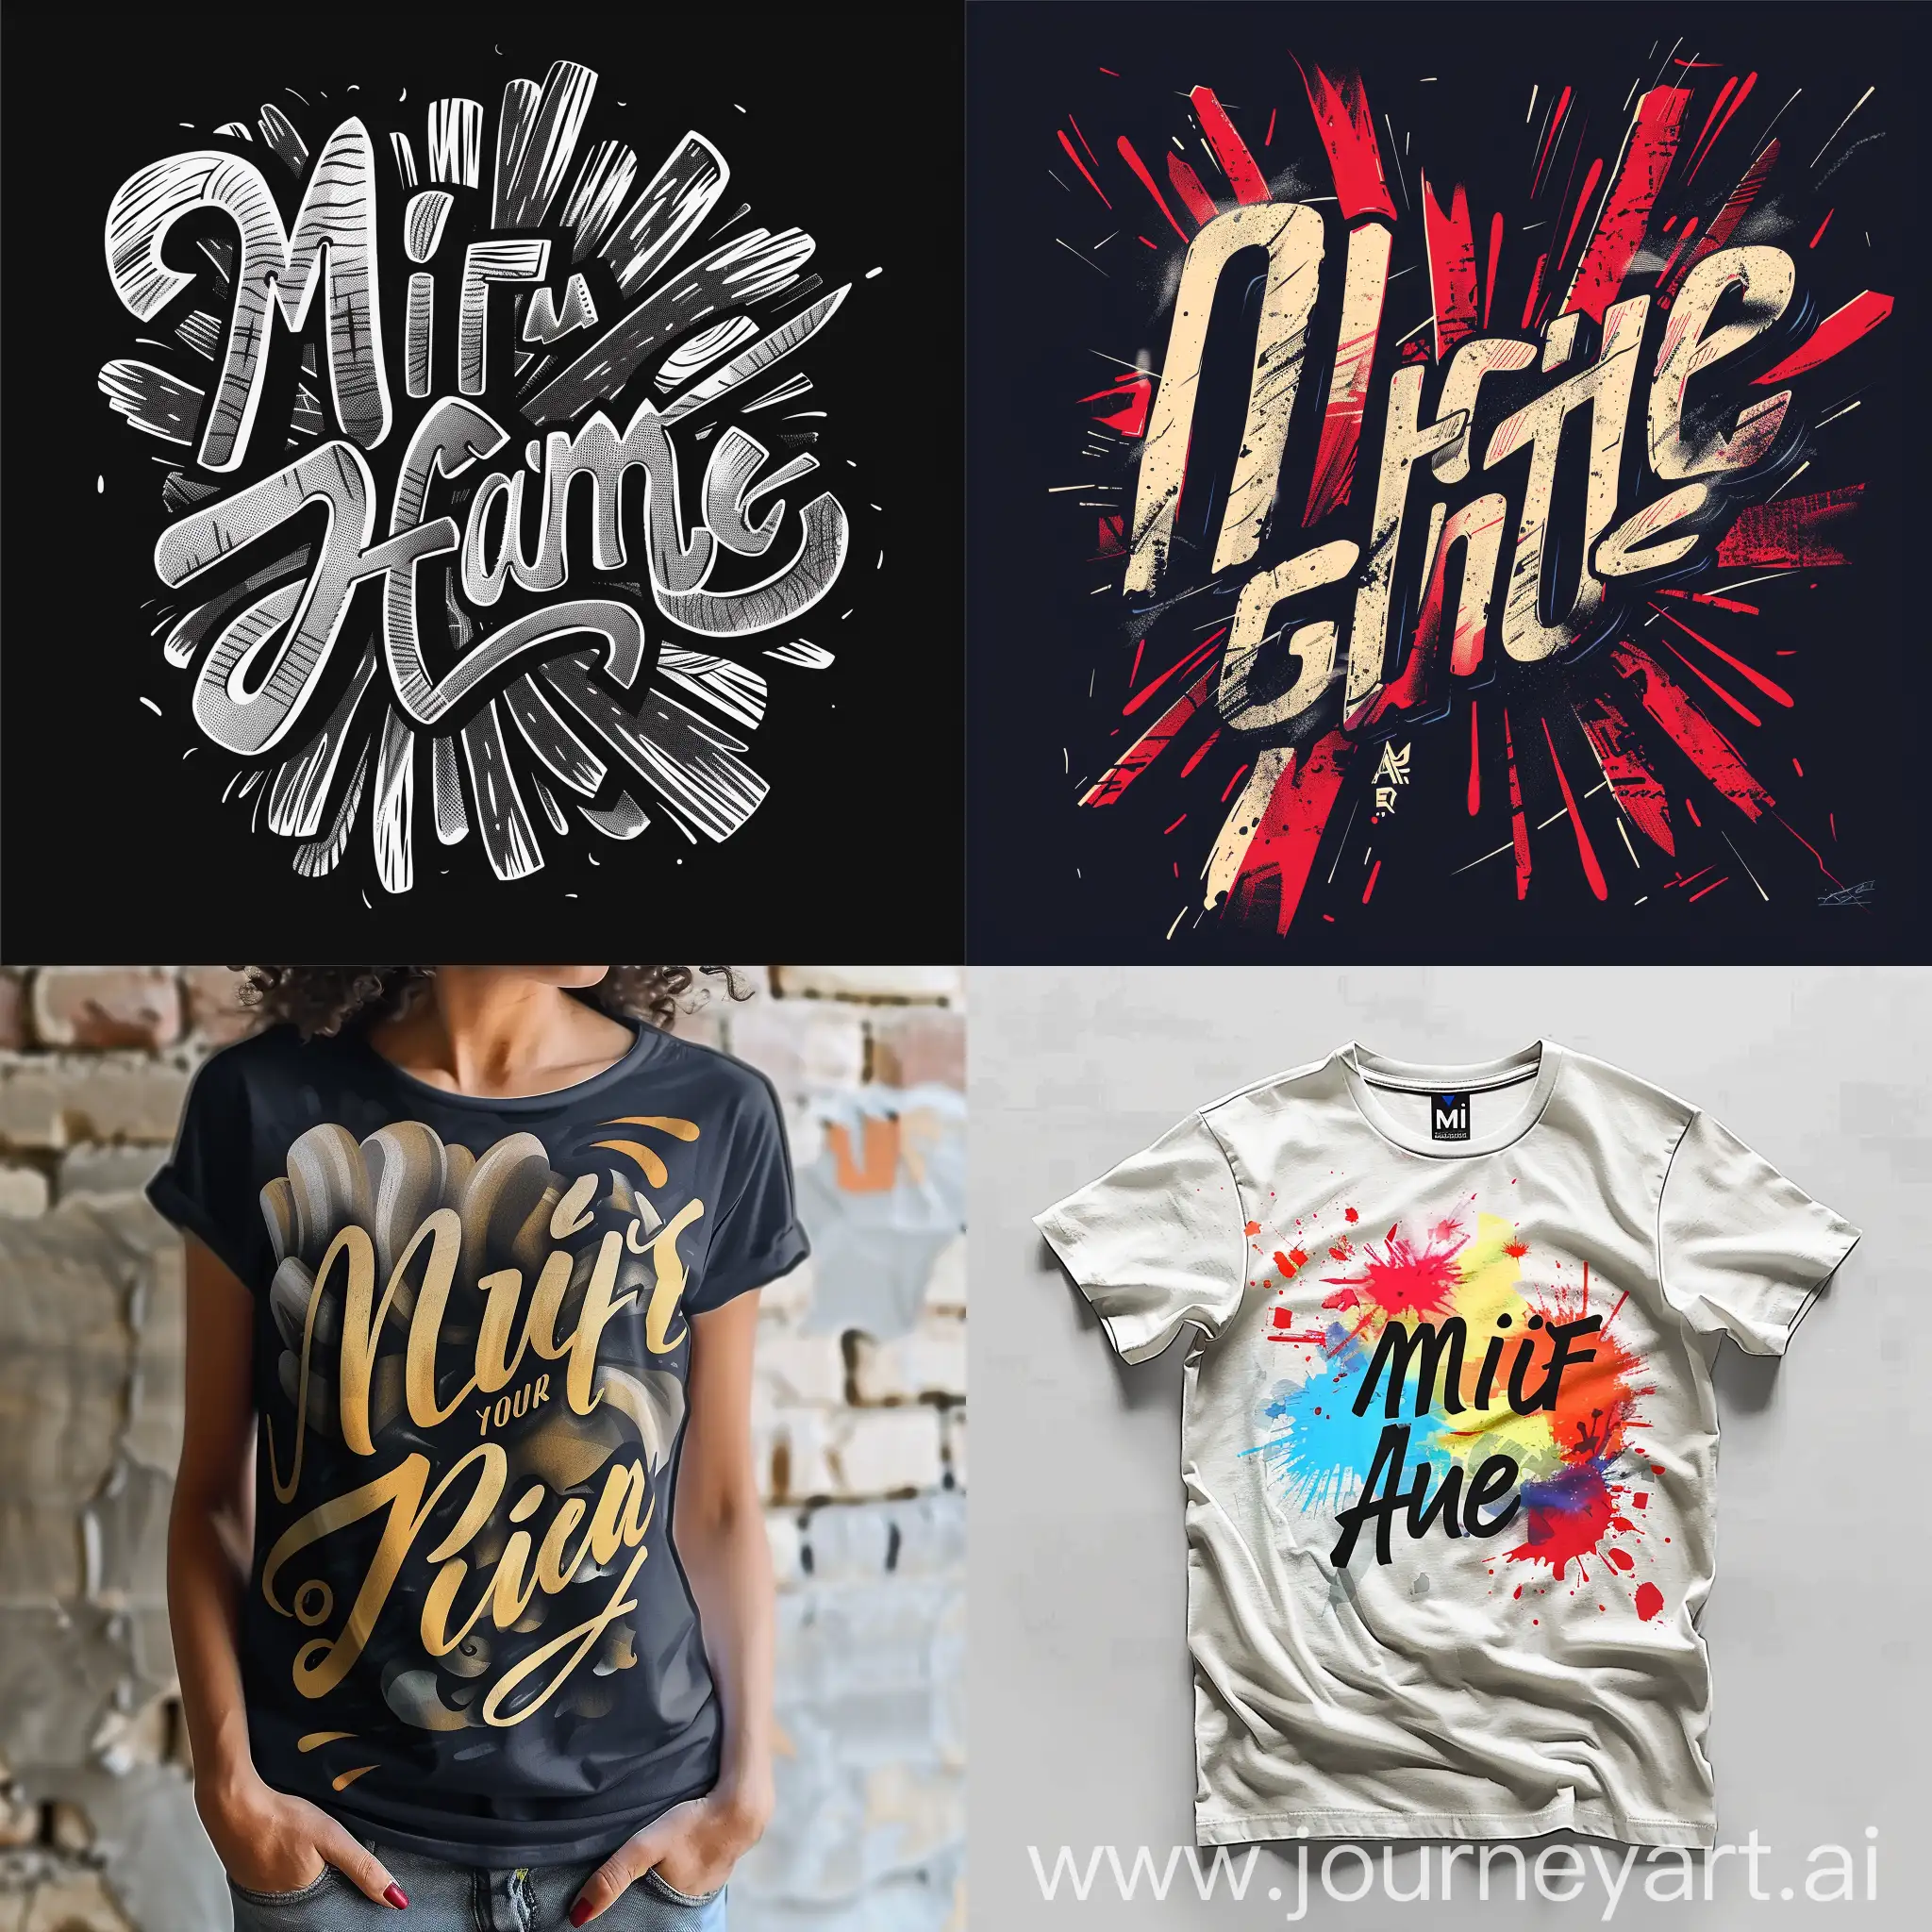 miFrance style typography t shirt design